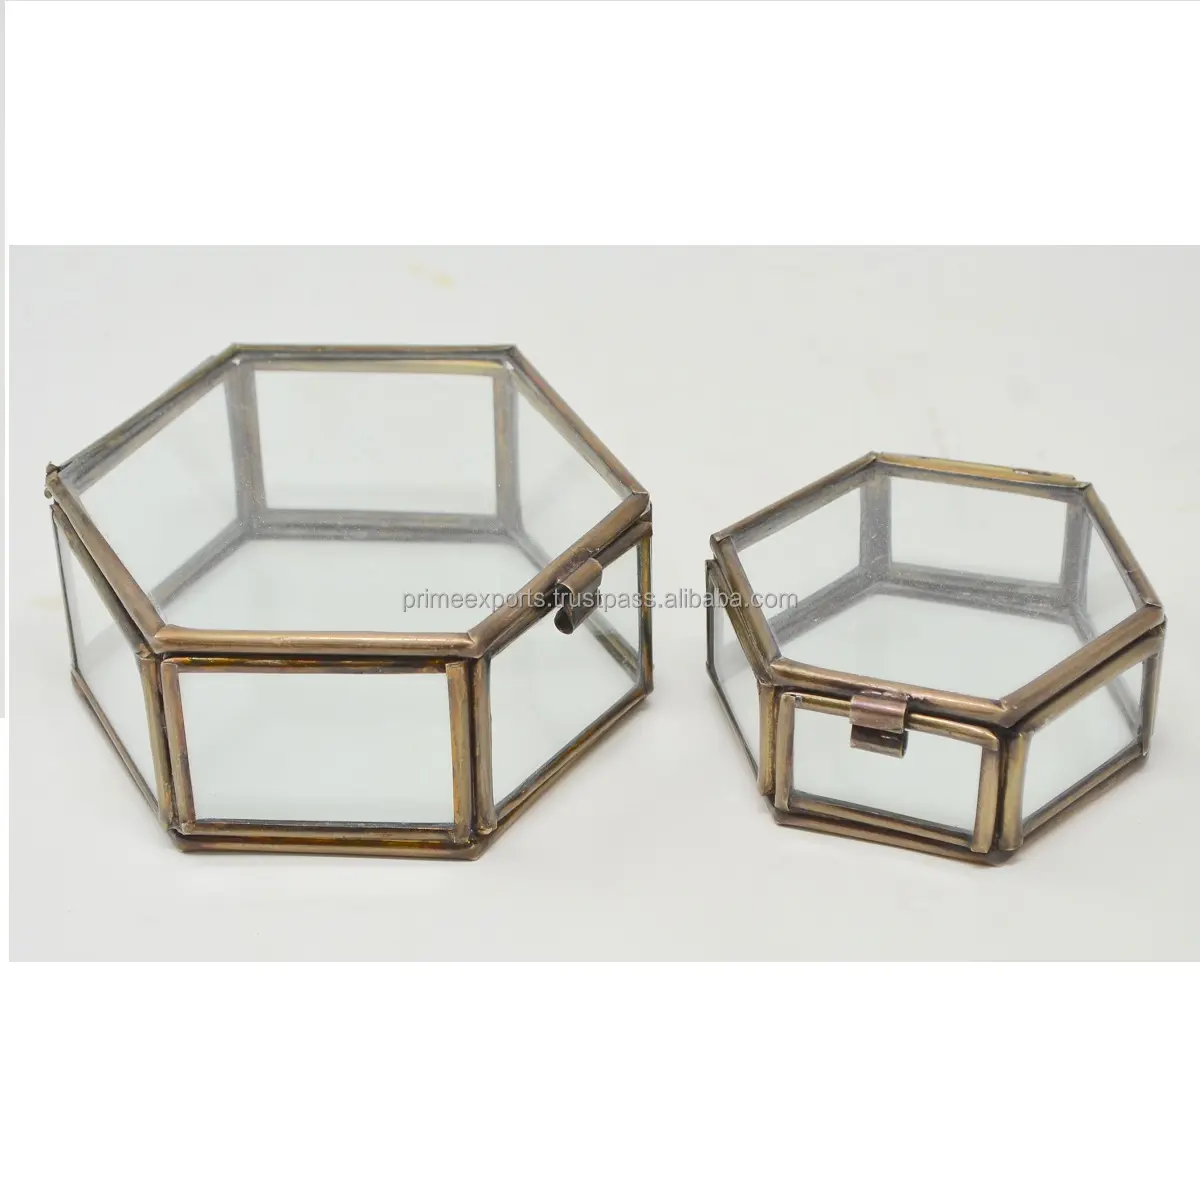 Glass diamond shaped design brass or gold decorative jewelry boxes for home decor brass serving glass trays